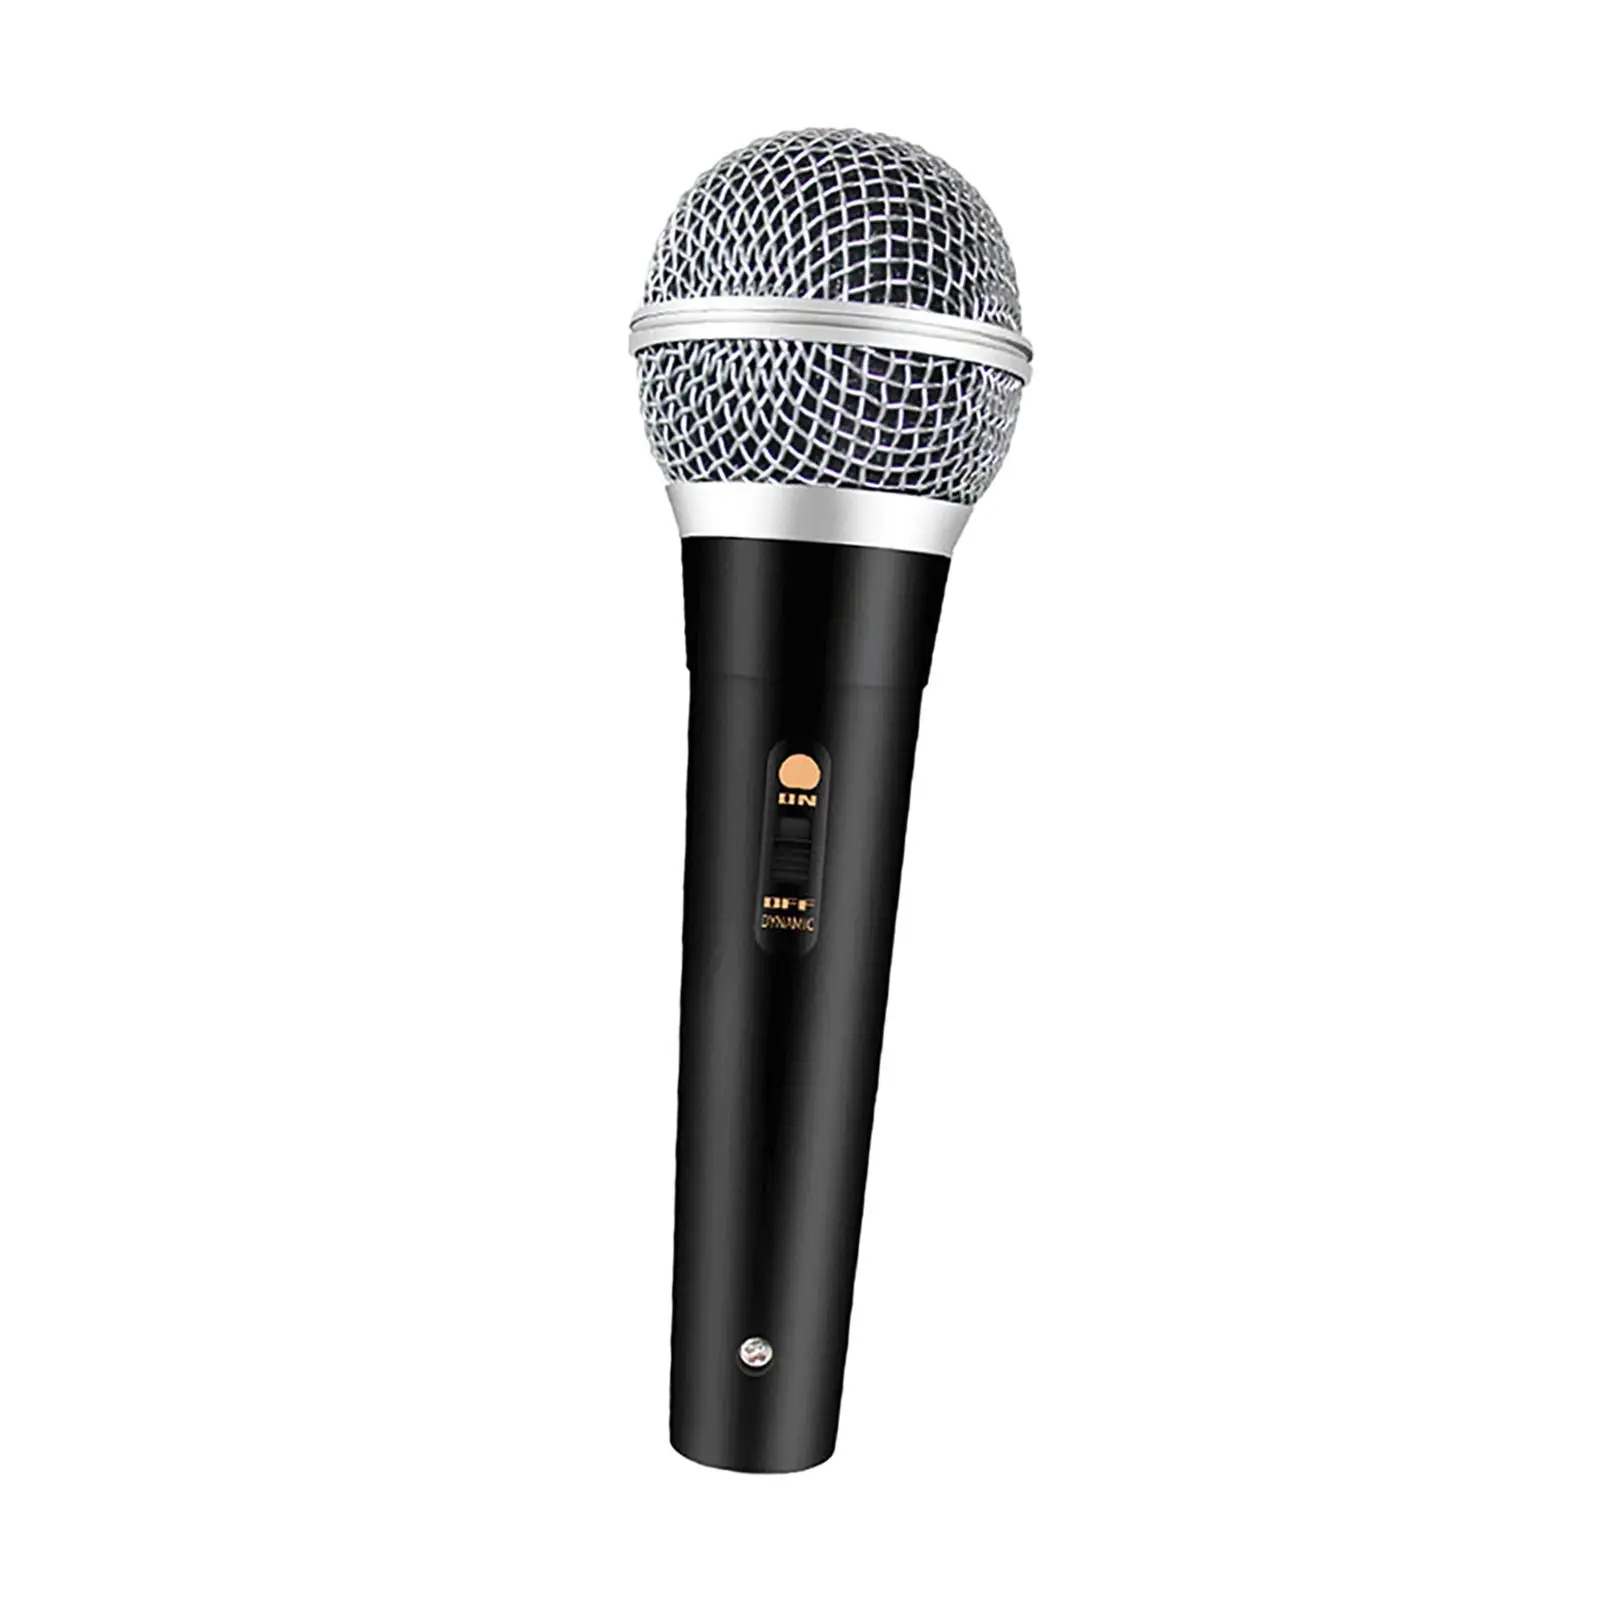 Wired Dynamic Karaoke Mic Microphone Mic Metal Wire Mesh Head with on and Off Switch 9.8ft Cable for Outdoor Activity Durable